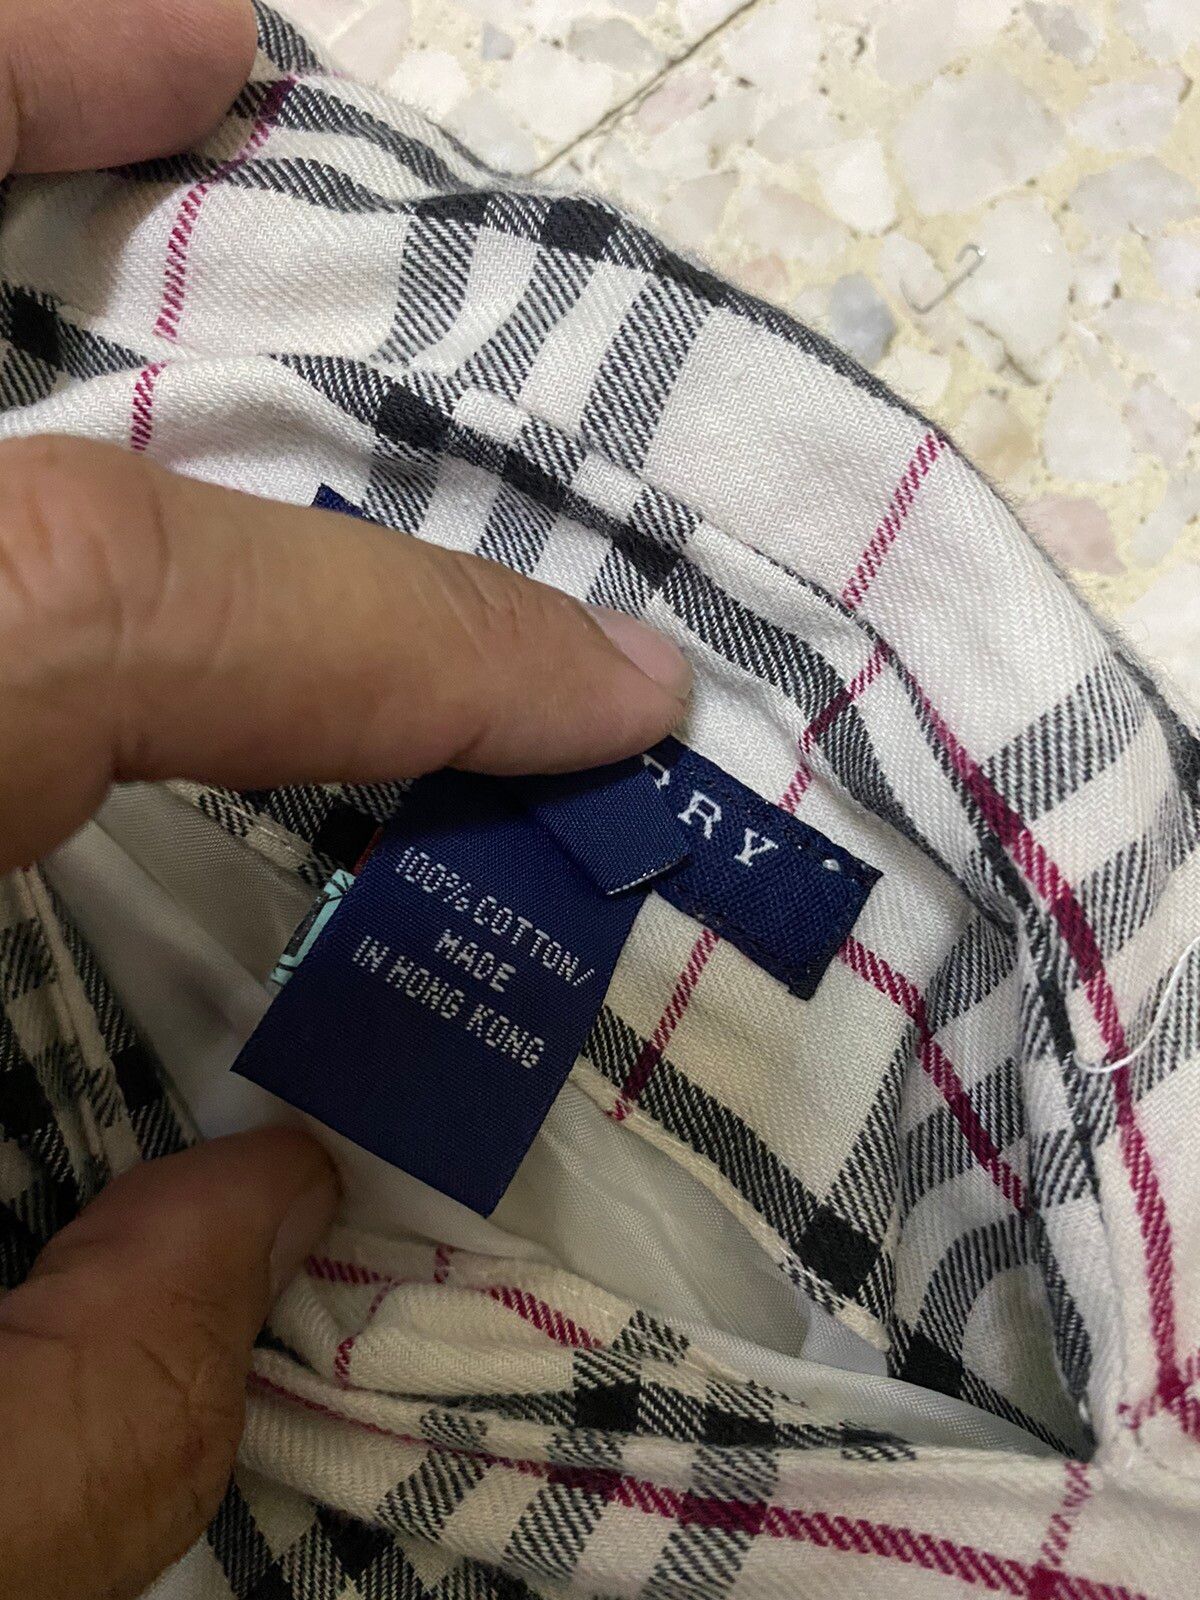 Burberry Nova Checked Reversible Quilted Jacket Nice Design - 5